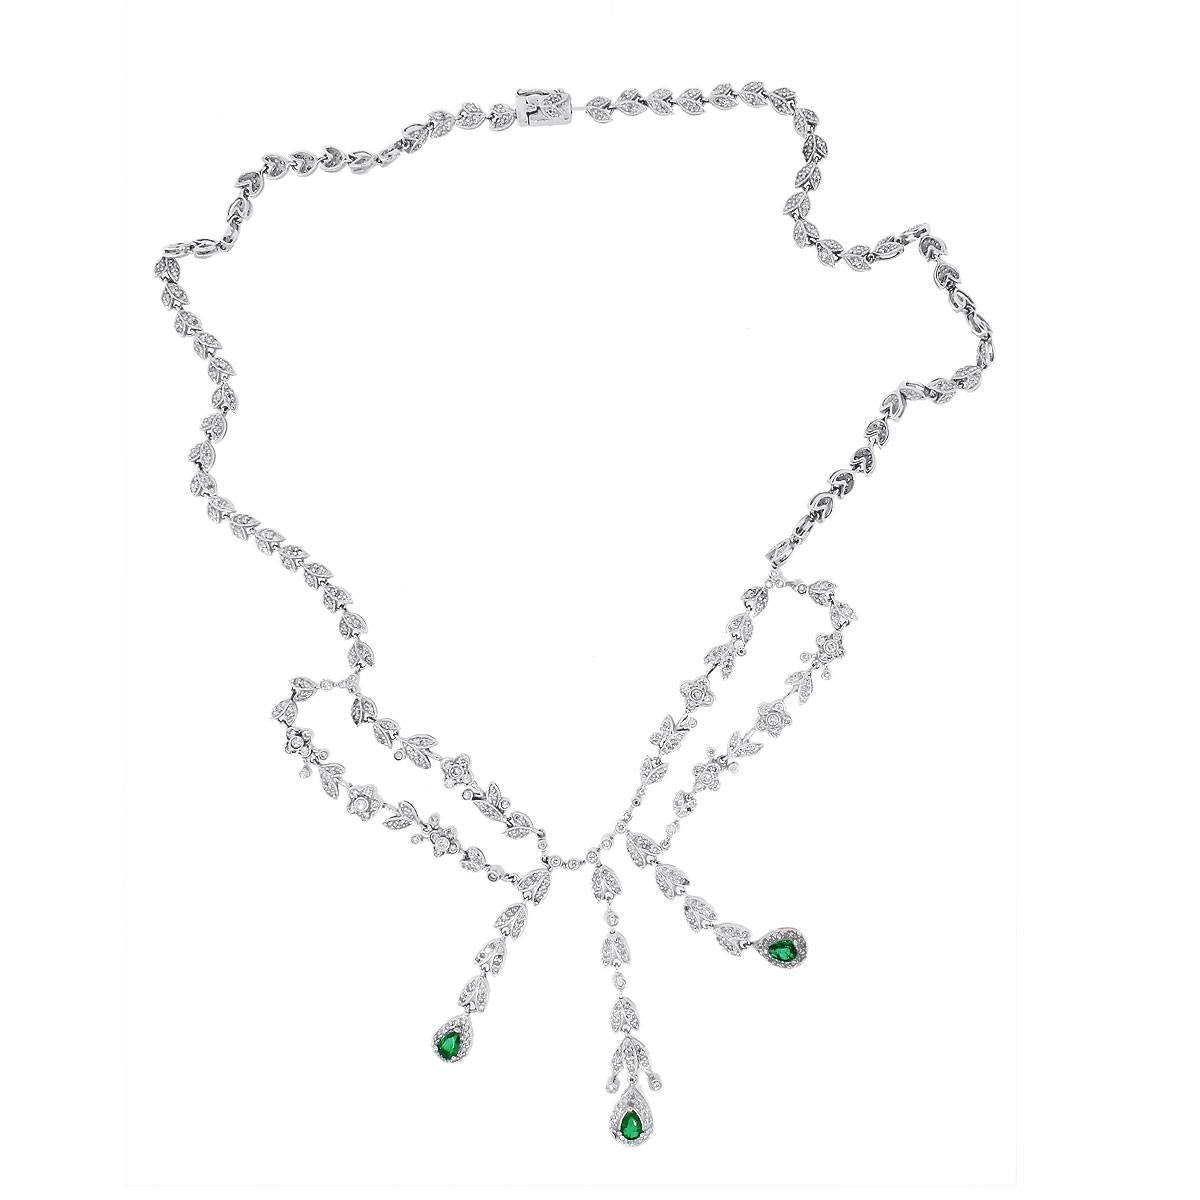 Pear Cut Diamond and Emerald Chandelier Necklace